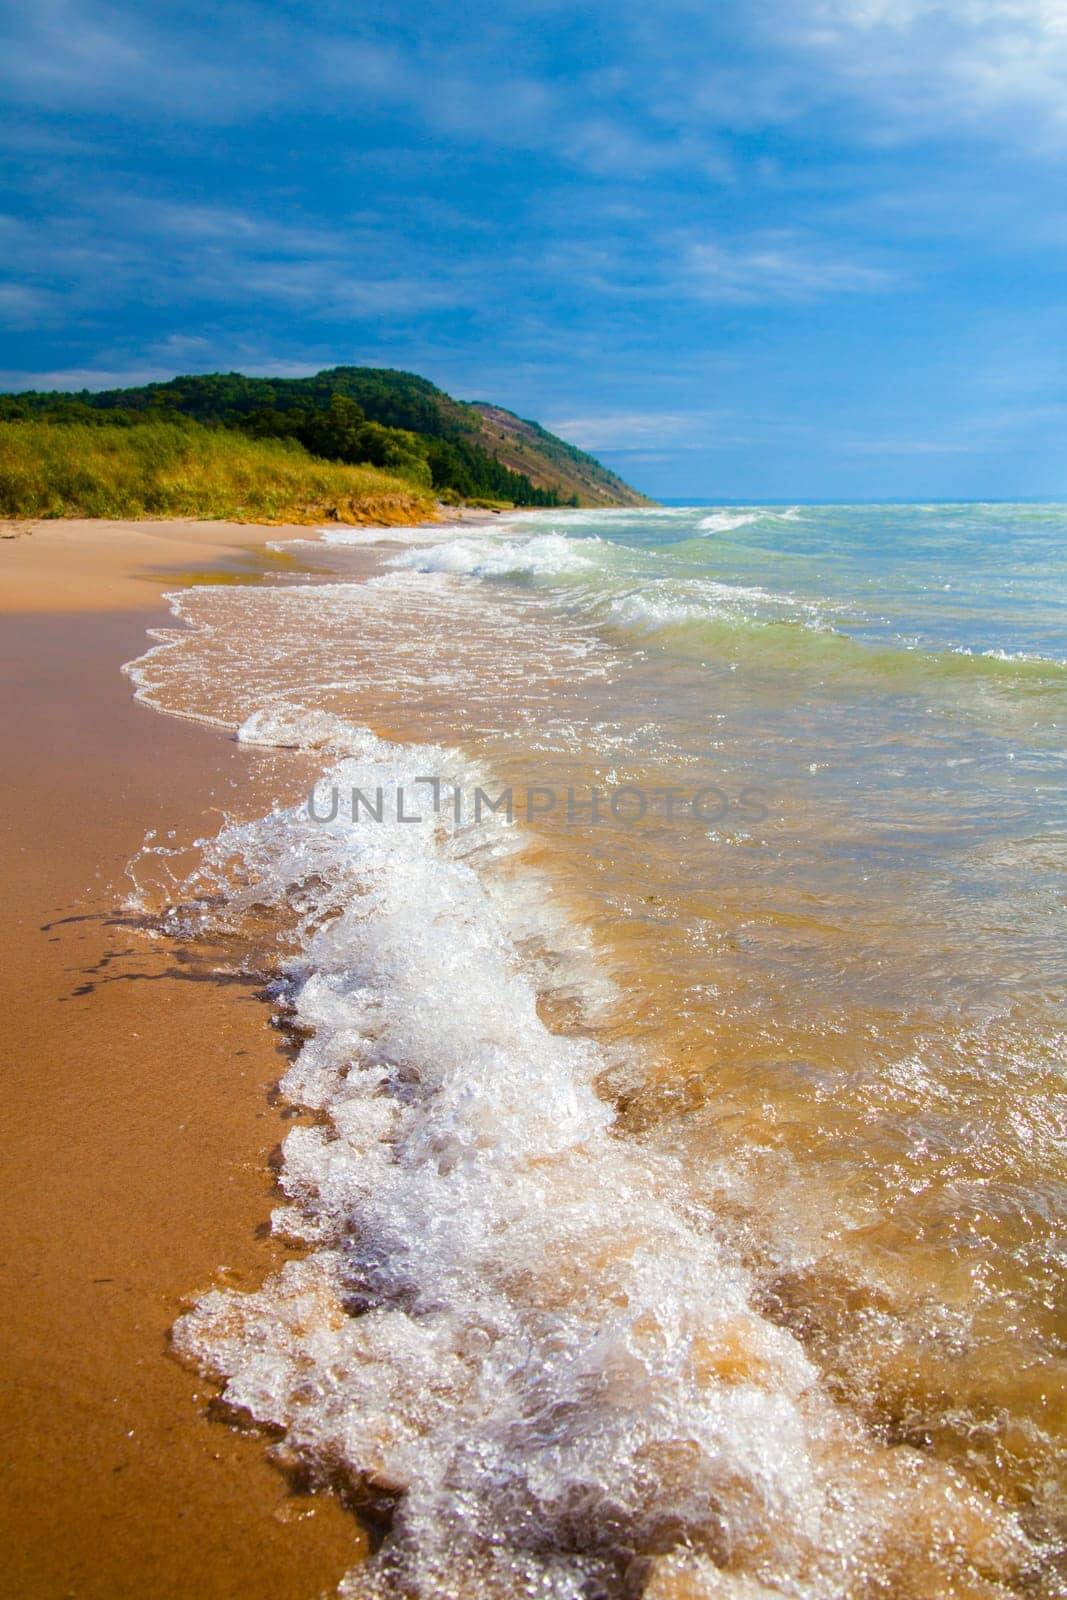 Sunlit Shoreline of Lake Michigan with Lush Green Bluff and Gentle Waves by njproductions